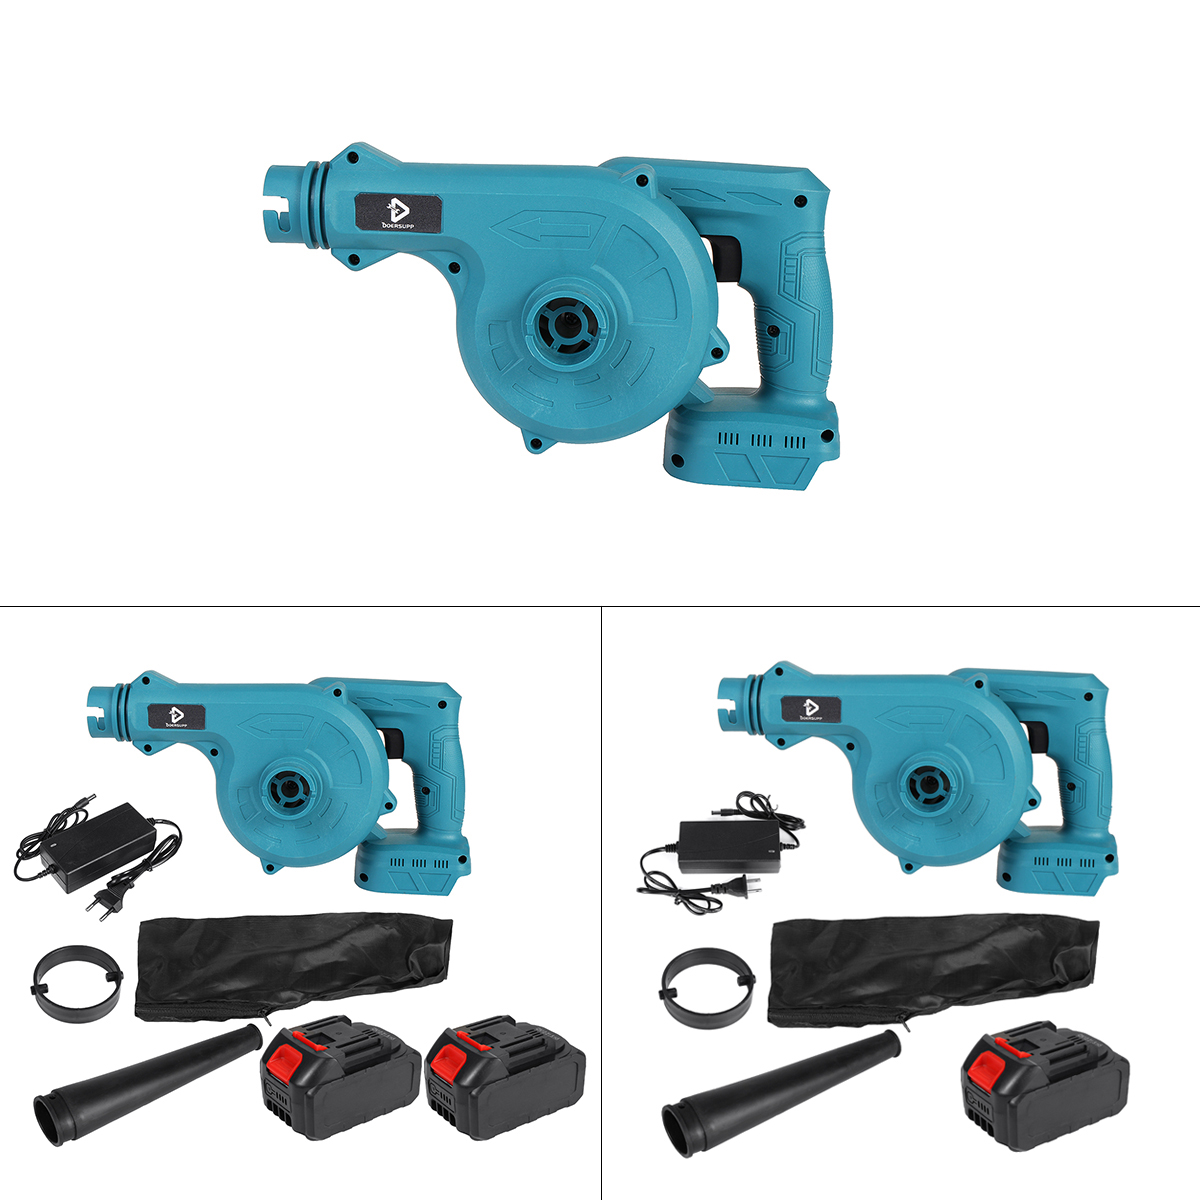 Doersupp-2-IN-1-Cordless-Electric-Air-Blower-Vacuum-Computer-Dust-Cleaner-Leaf-Blower-Battery-Displa-1860679-13